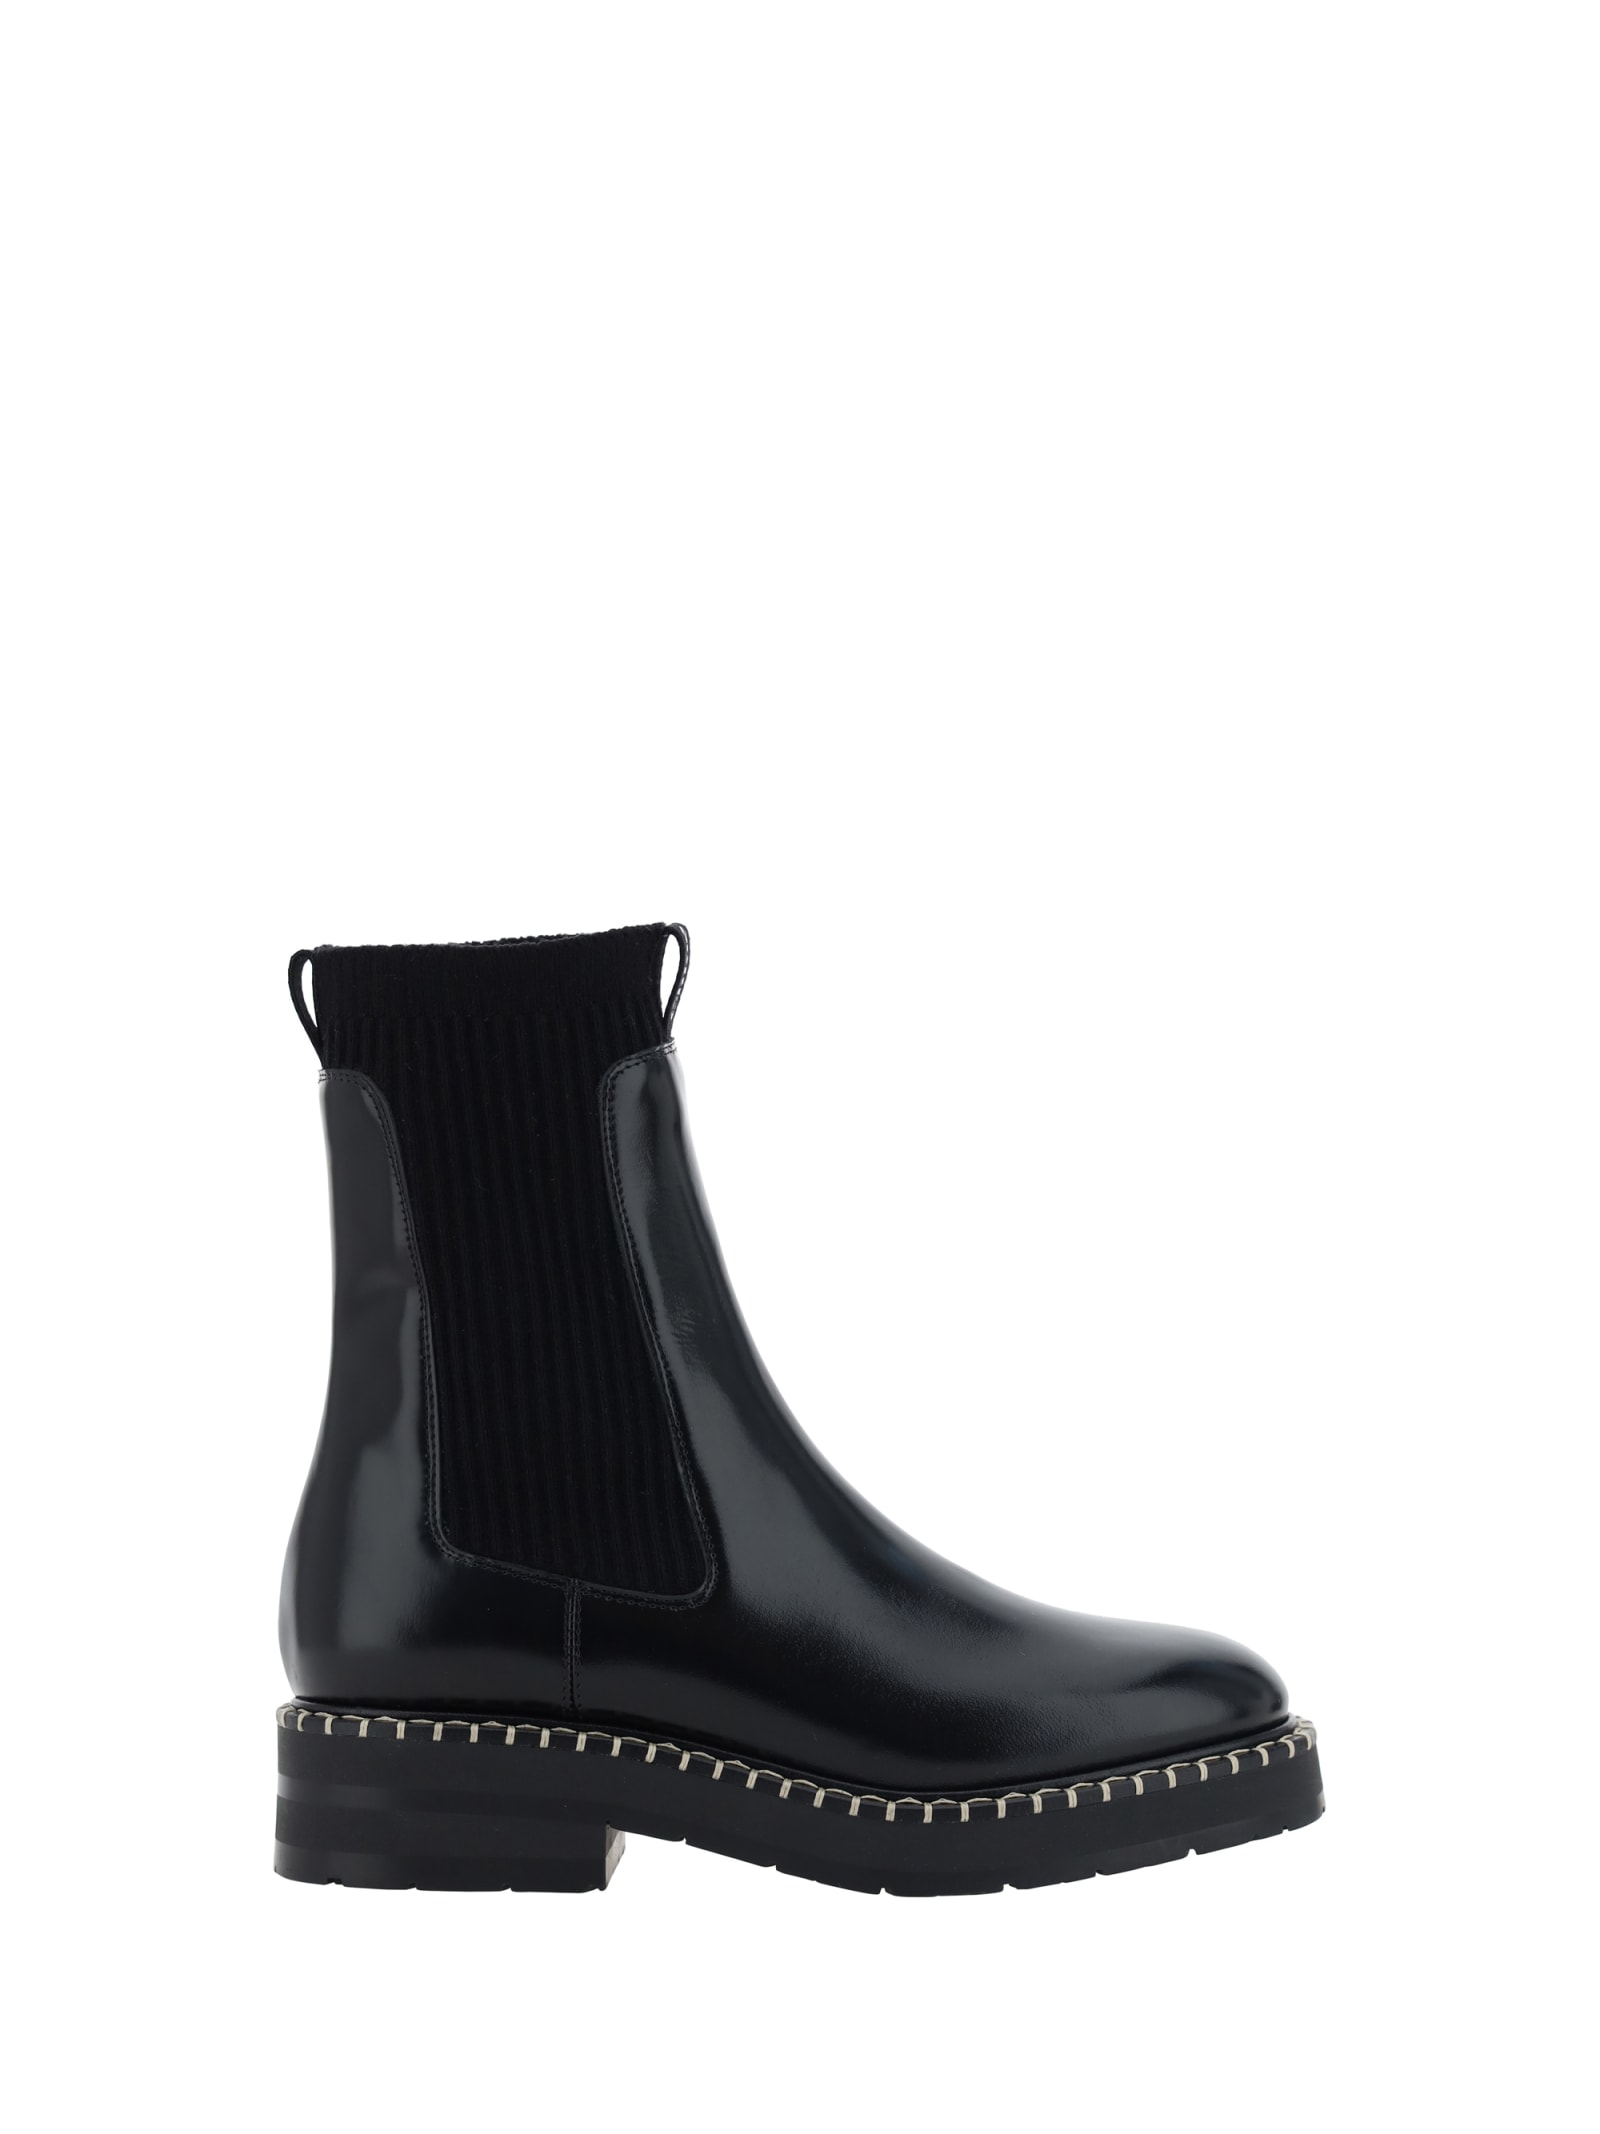 Chloé Glossy Ankle Boots